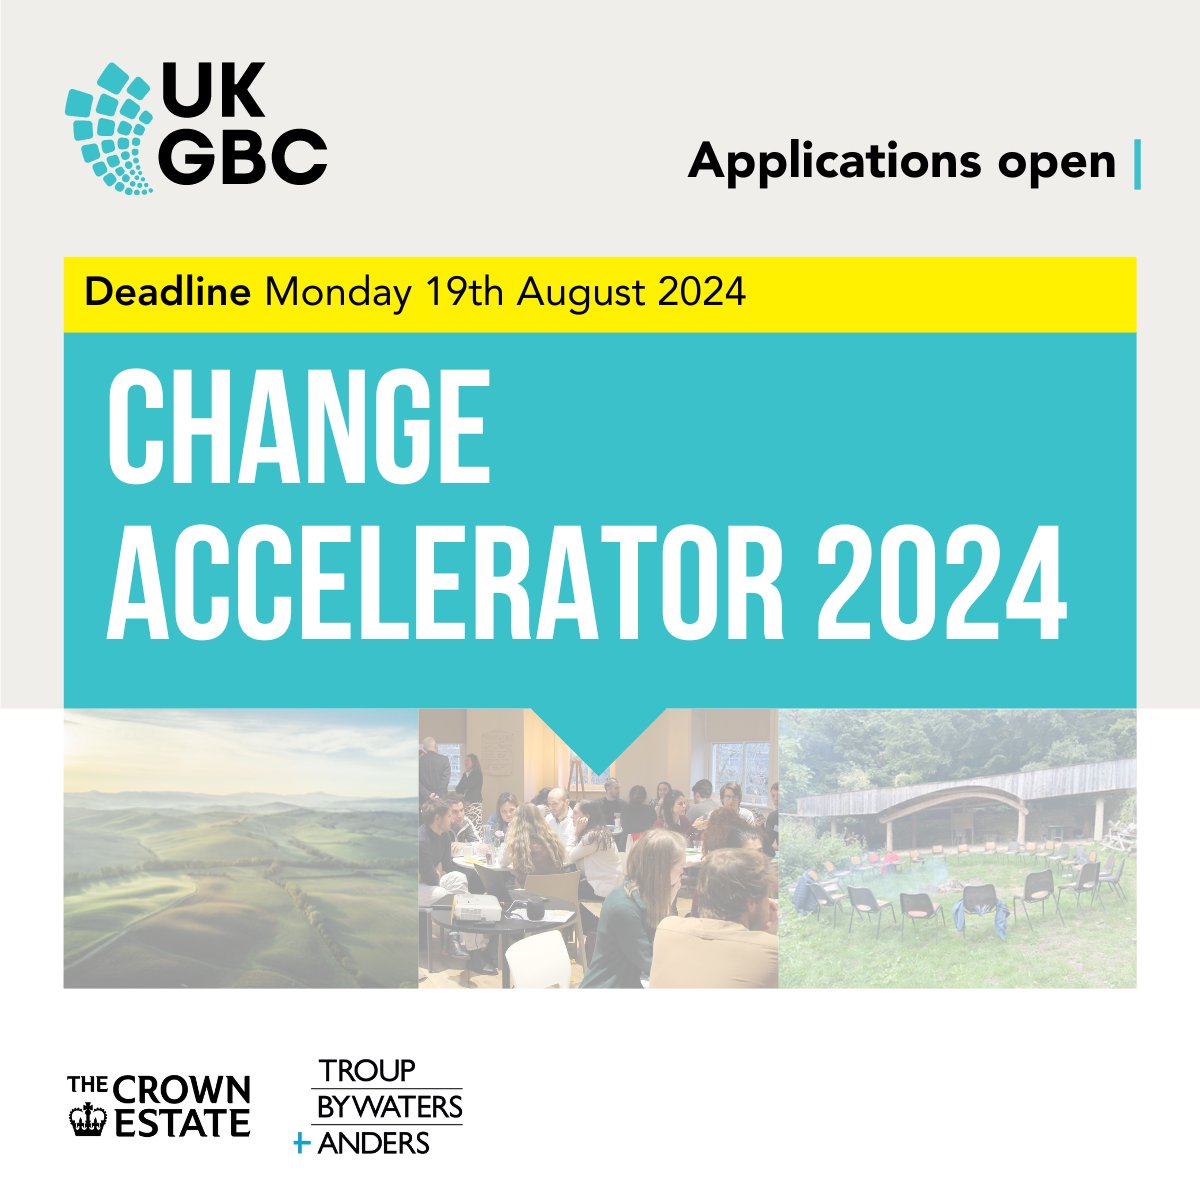 💭Ready to develop the skills and confidence to drive transformational change? UKGBC's Change Accelerator programme is now open to applicants. Developed for middle to senior level professionals, to gain a fresh perspective on sustainability. Apply here: ukgbc.org/events/change-…